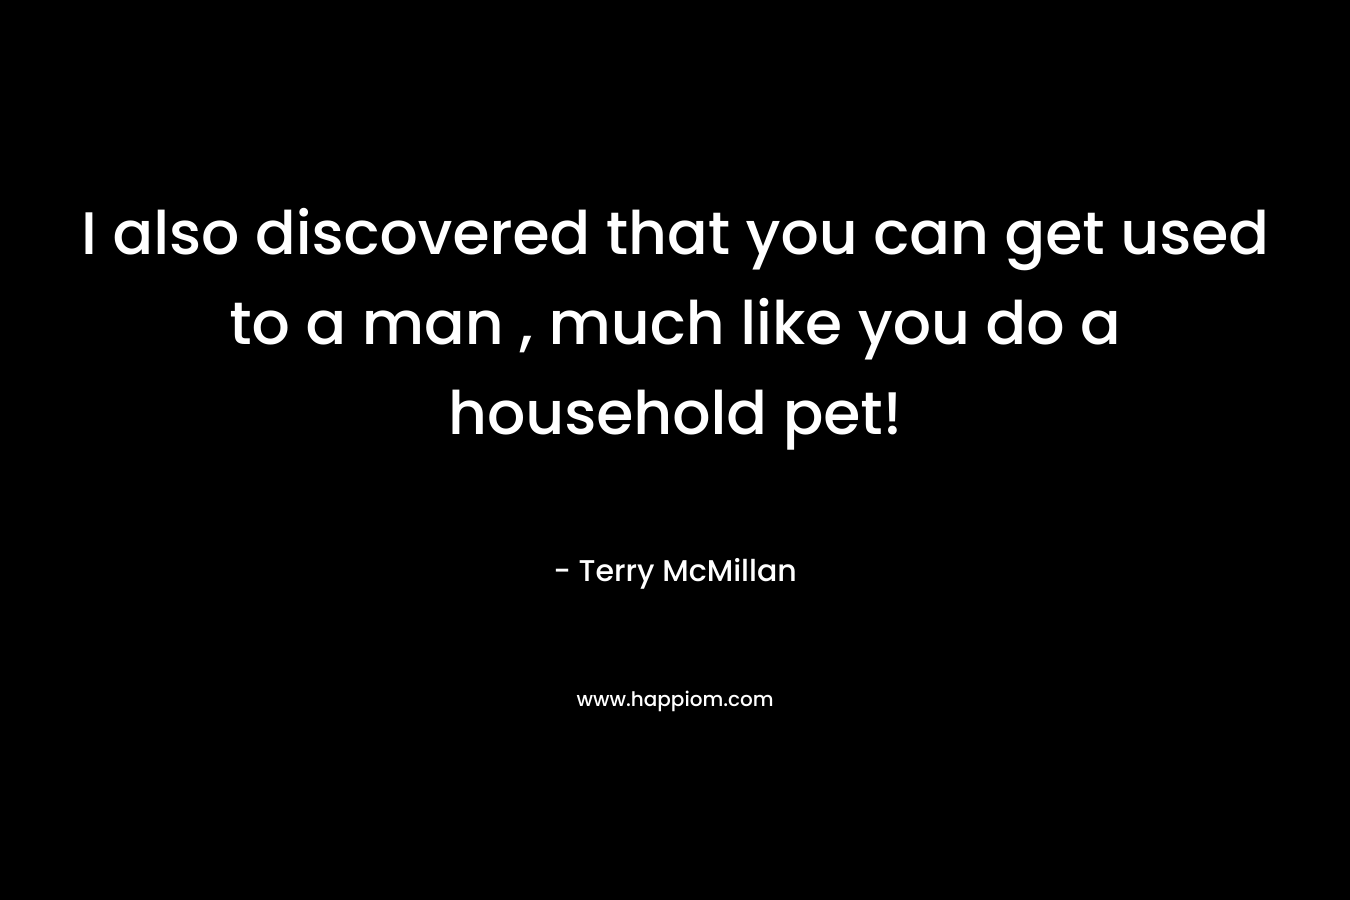 I also discovered that you can get used to a man , much like you do a household pet! – Terry McMillan